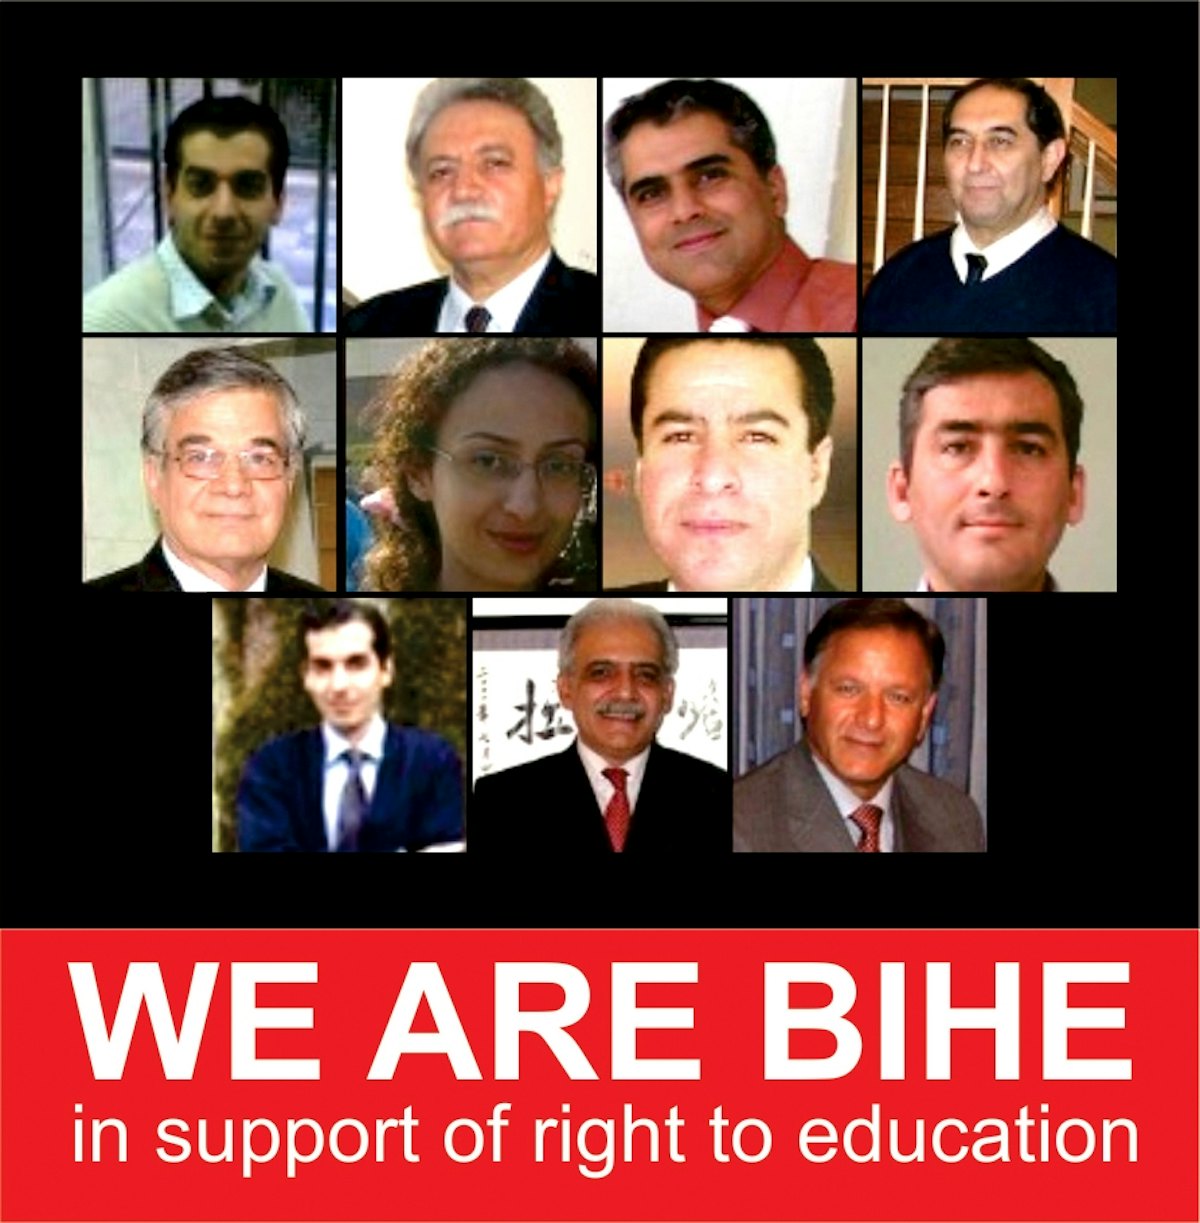 Human rights supporters have issued a poster depicting some of those staff of the Baha'i Institute for Higher Education who have been arrested in Iran. They were offering education to young community members barred by the government from attending university.